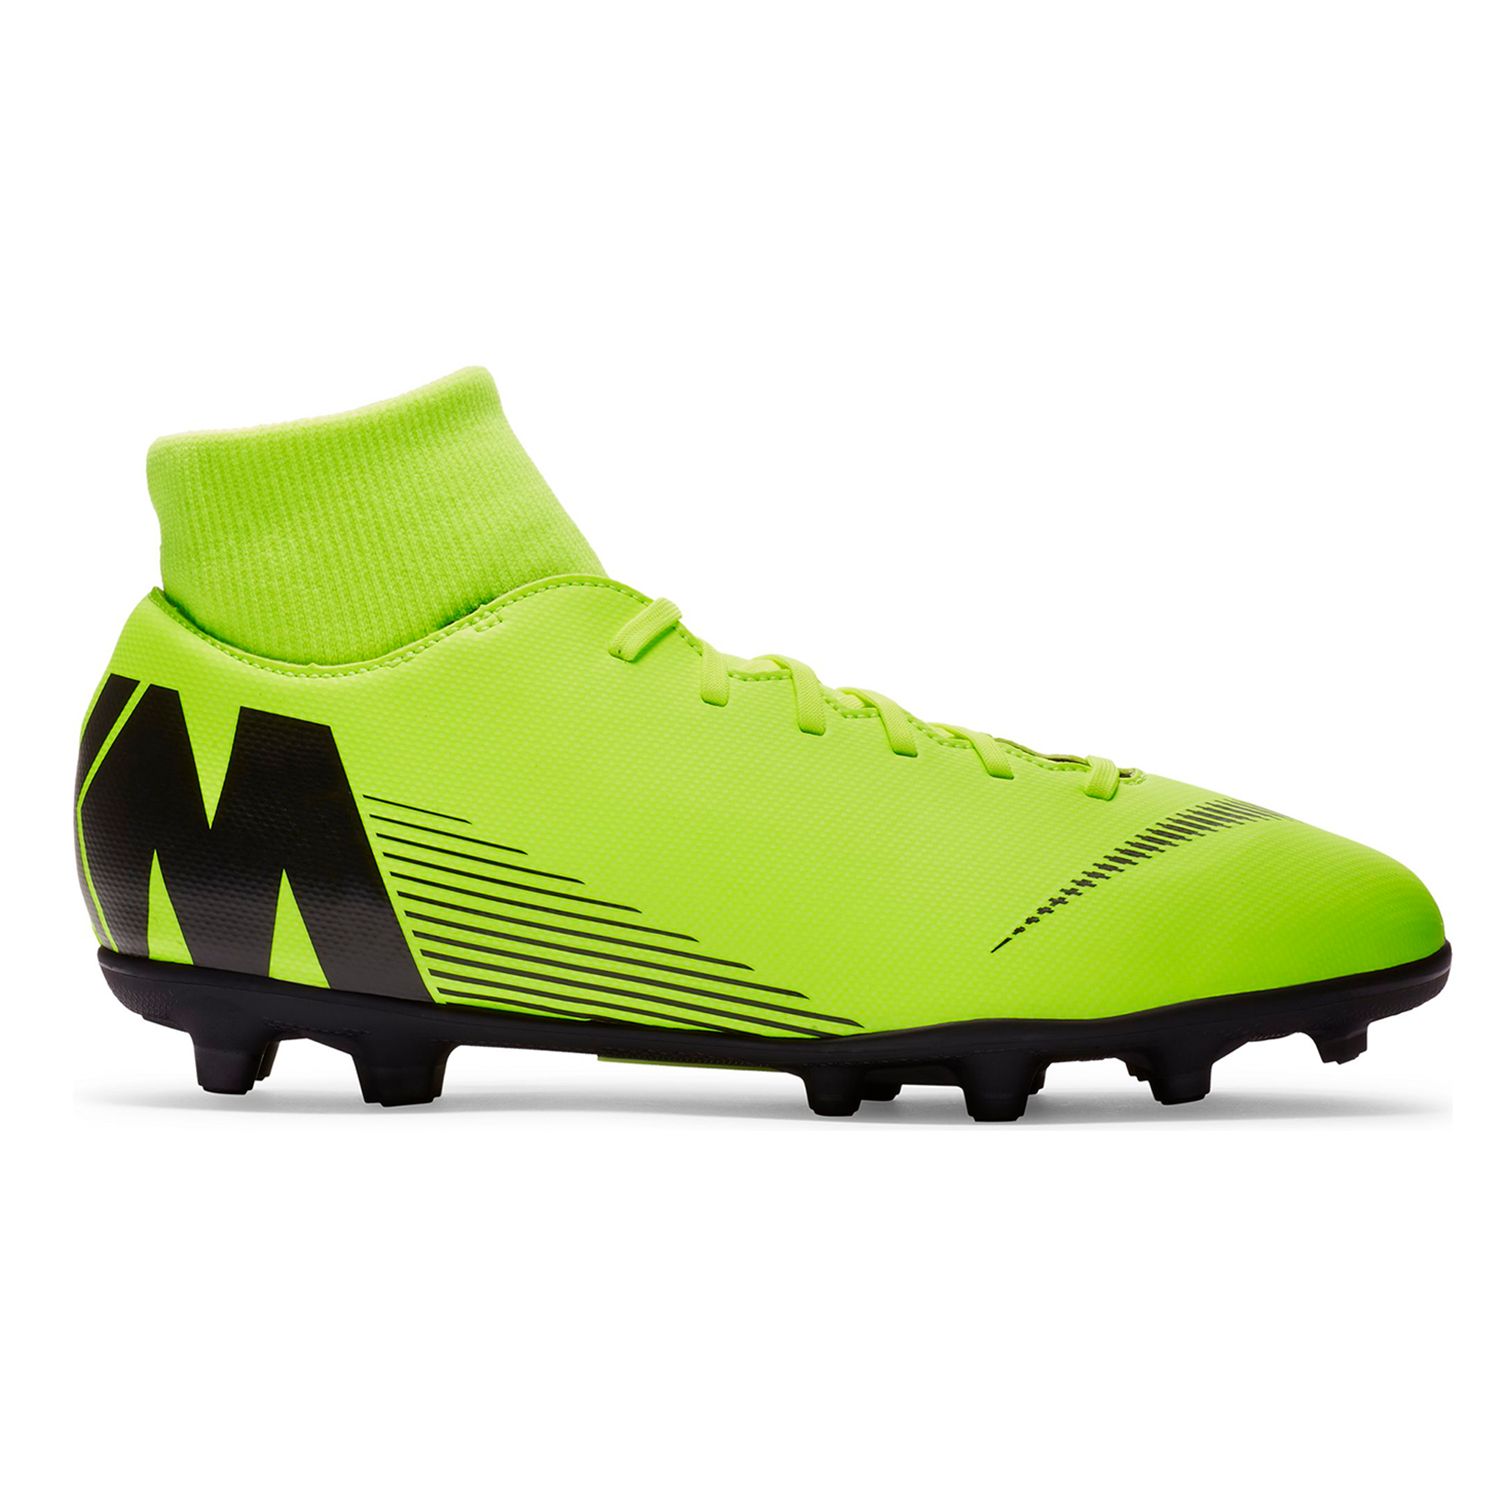 NIKE MEN 'S SUPERFLY 6 CLUB MG SOCCER CLEAT.